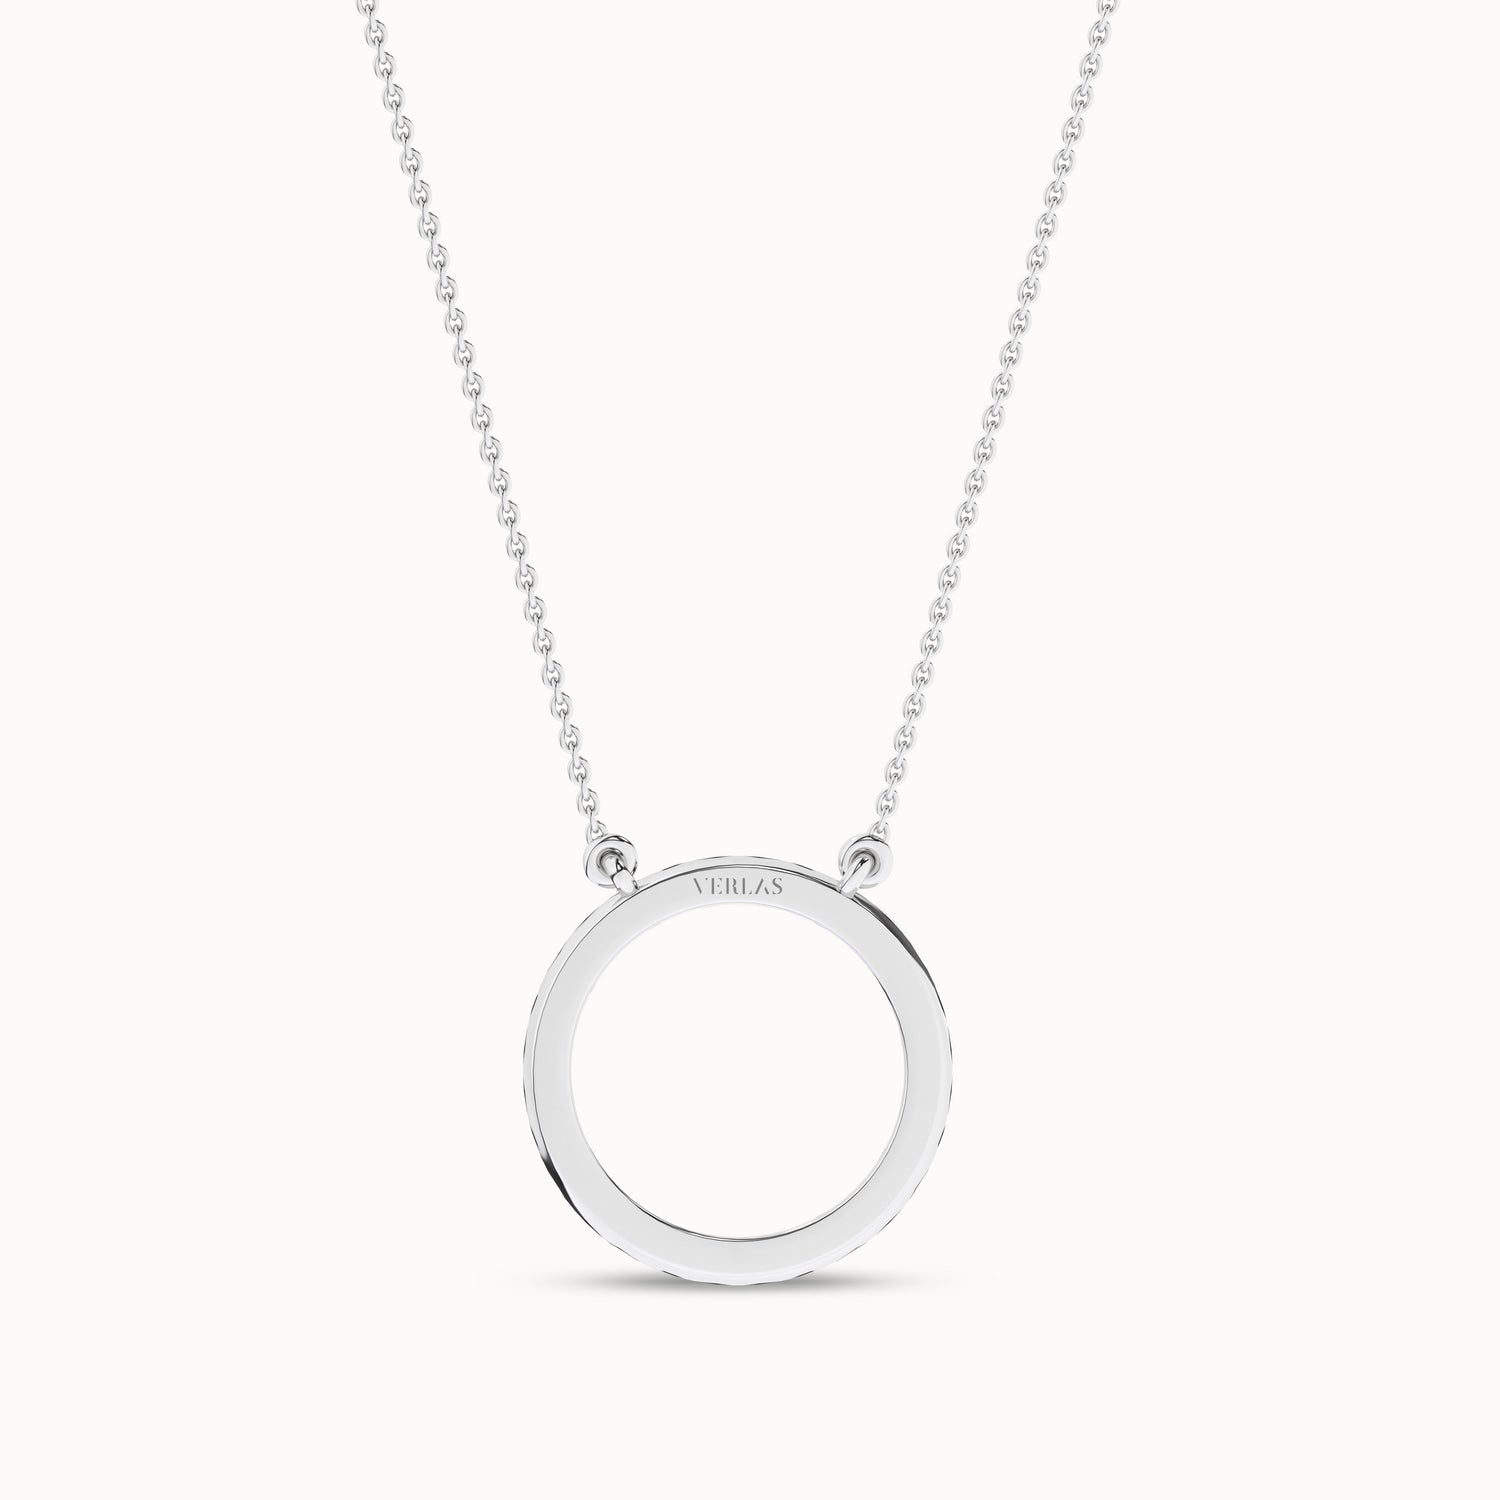 Circular Silhouette Necklace_Product Angle_1/4Ct. - 3